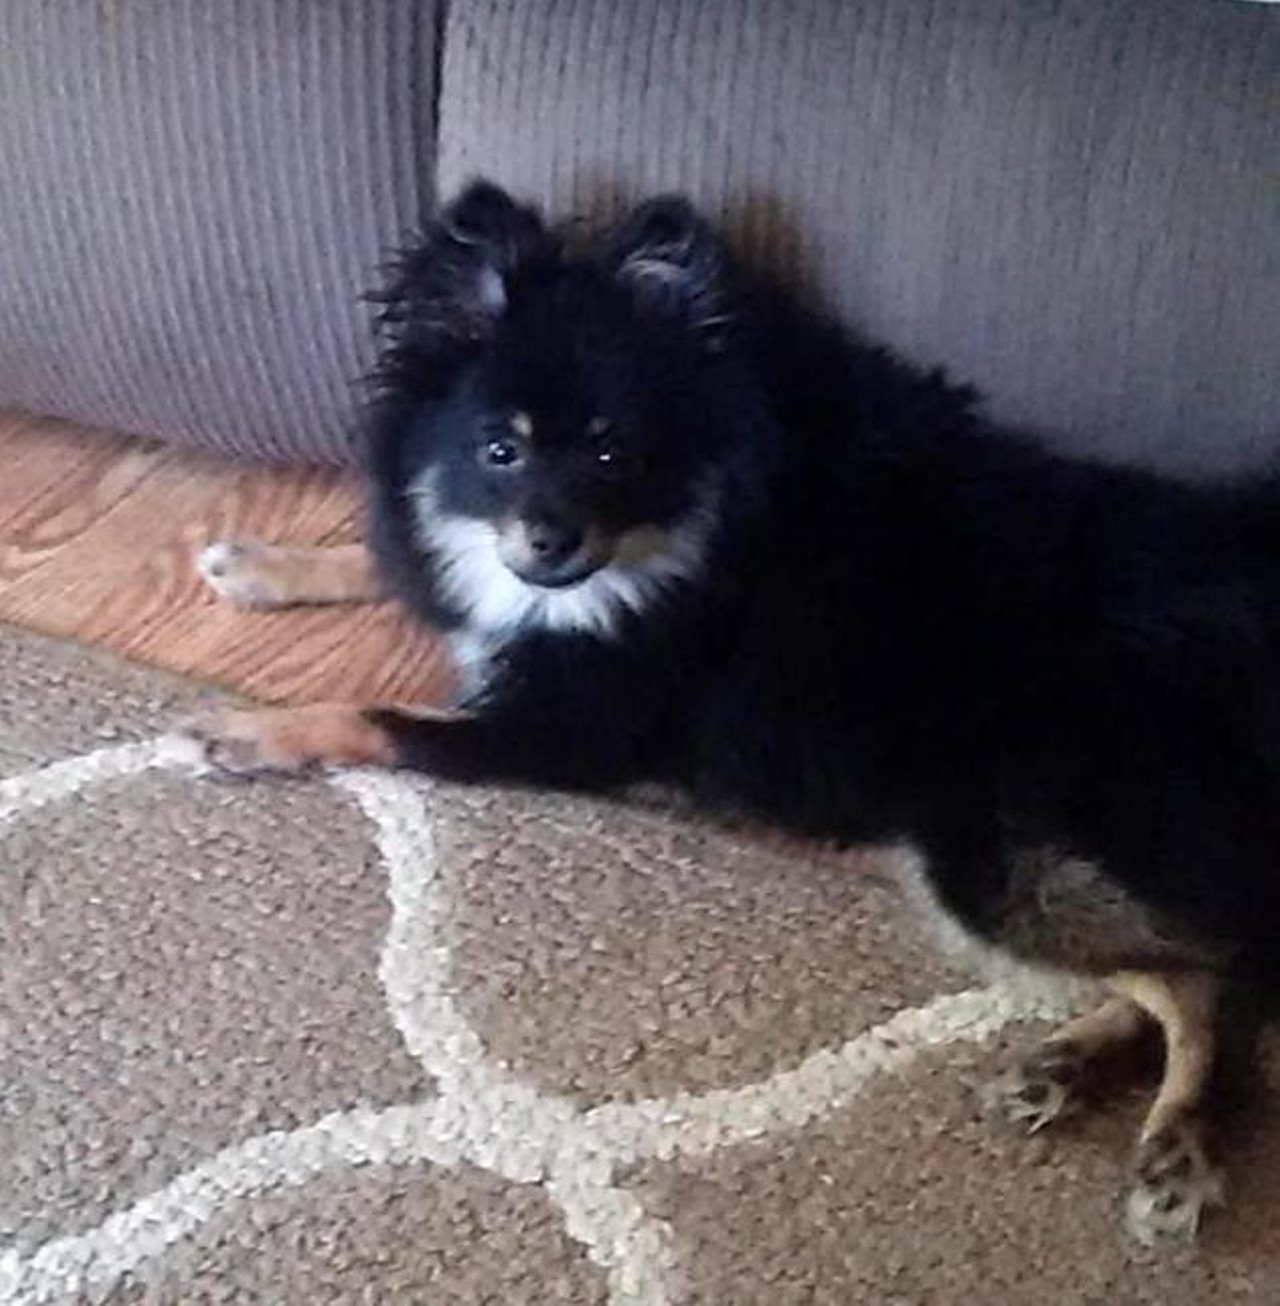  Samson
Pomeranian | Male 
Samson looks sassy as hell laying down there and we love him